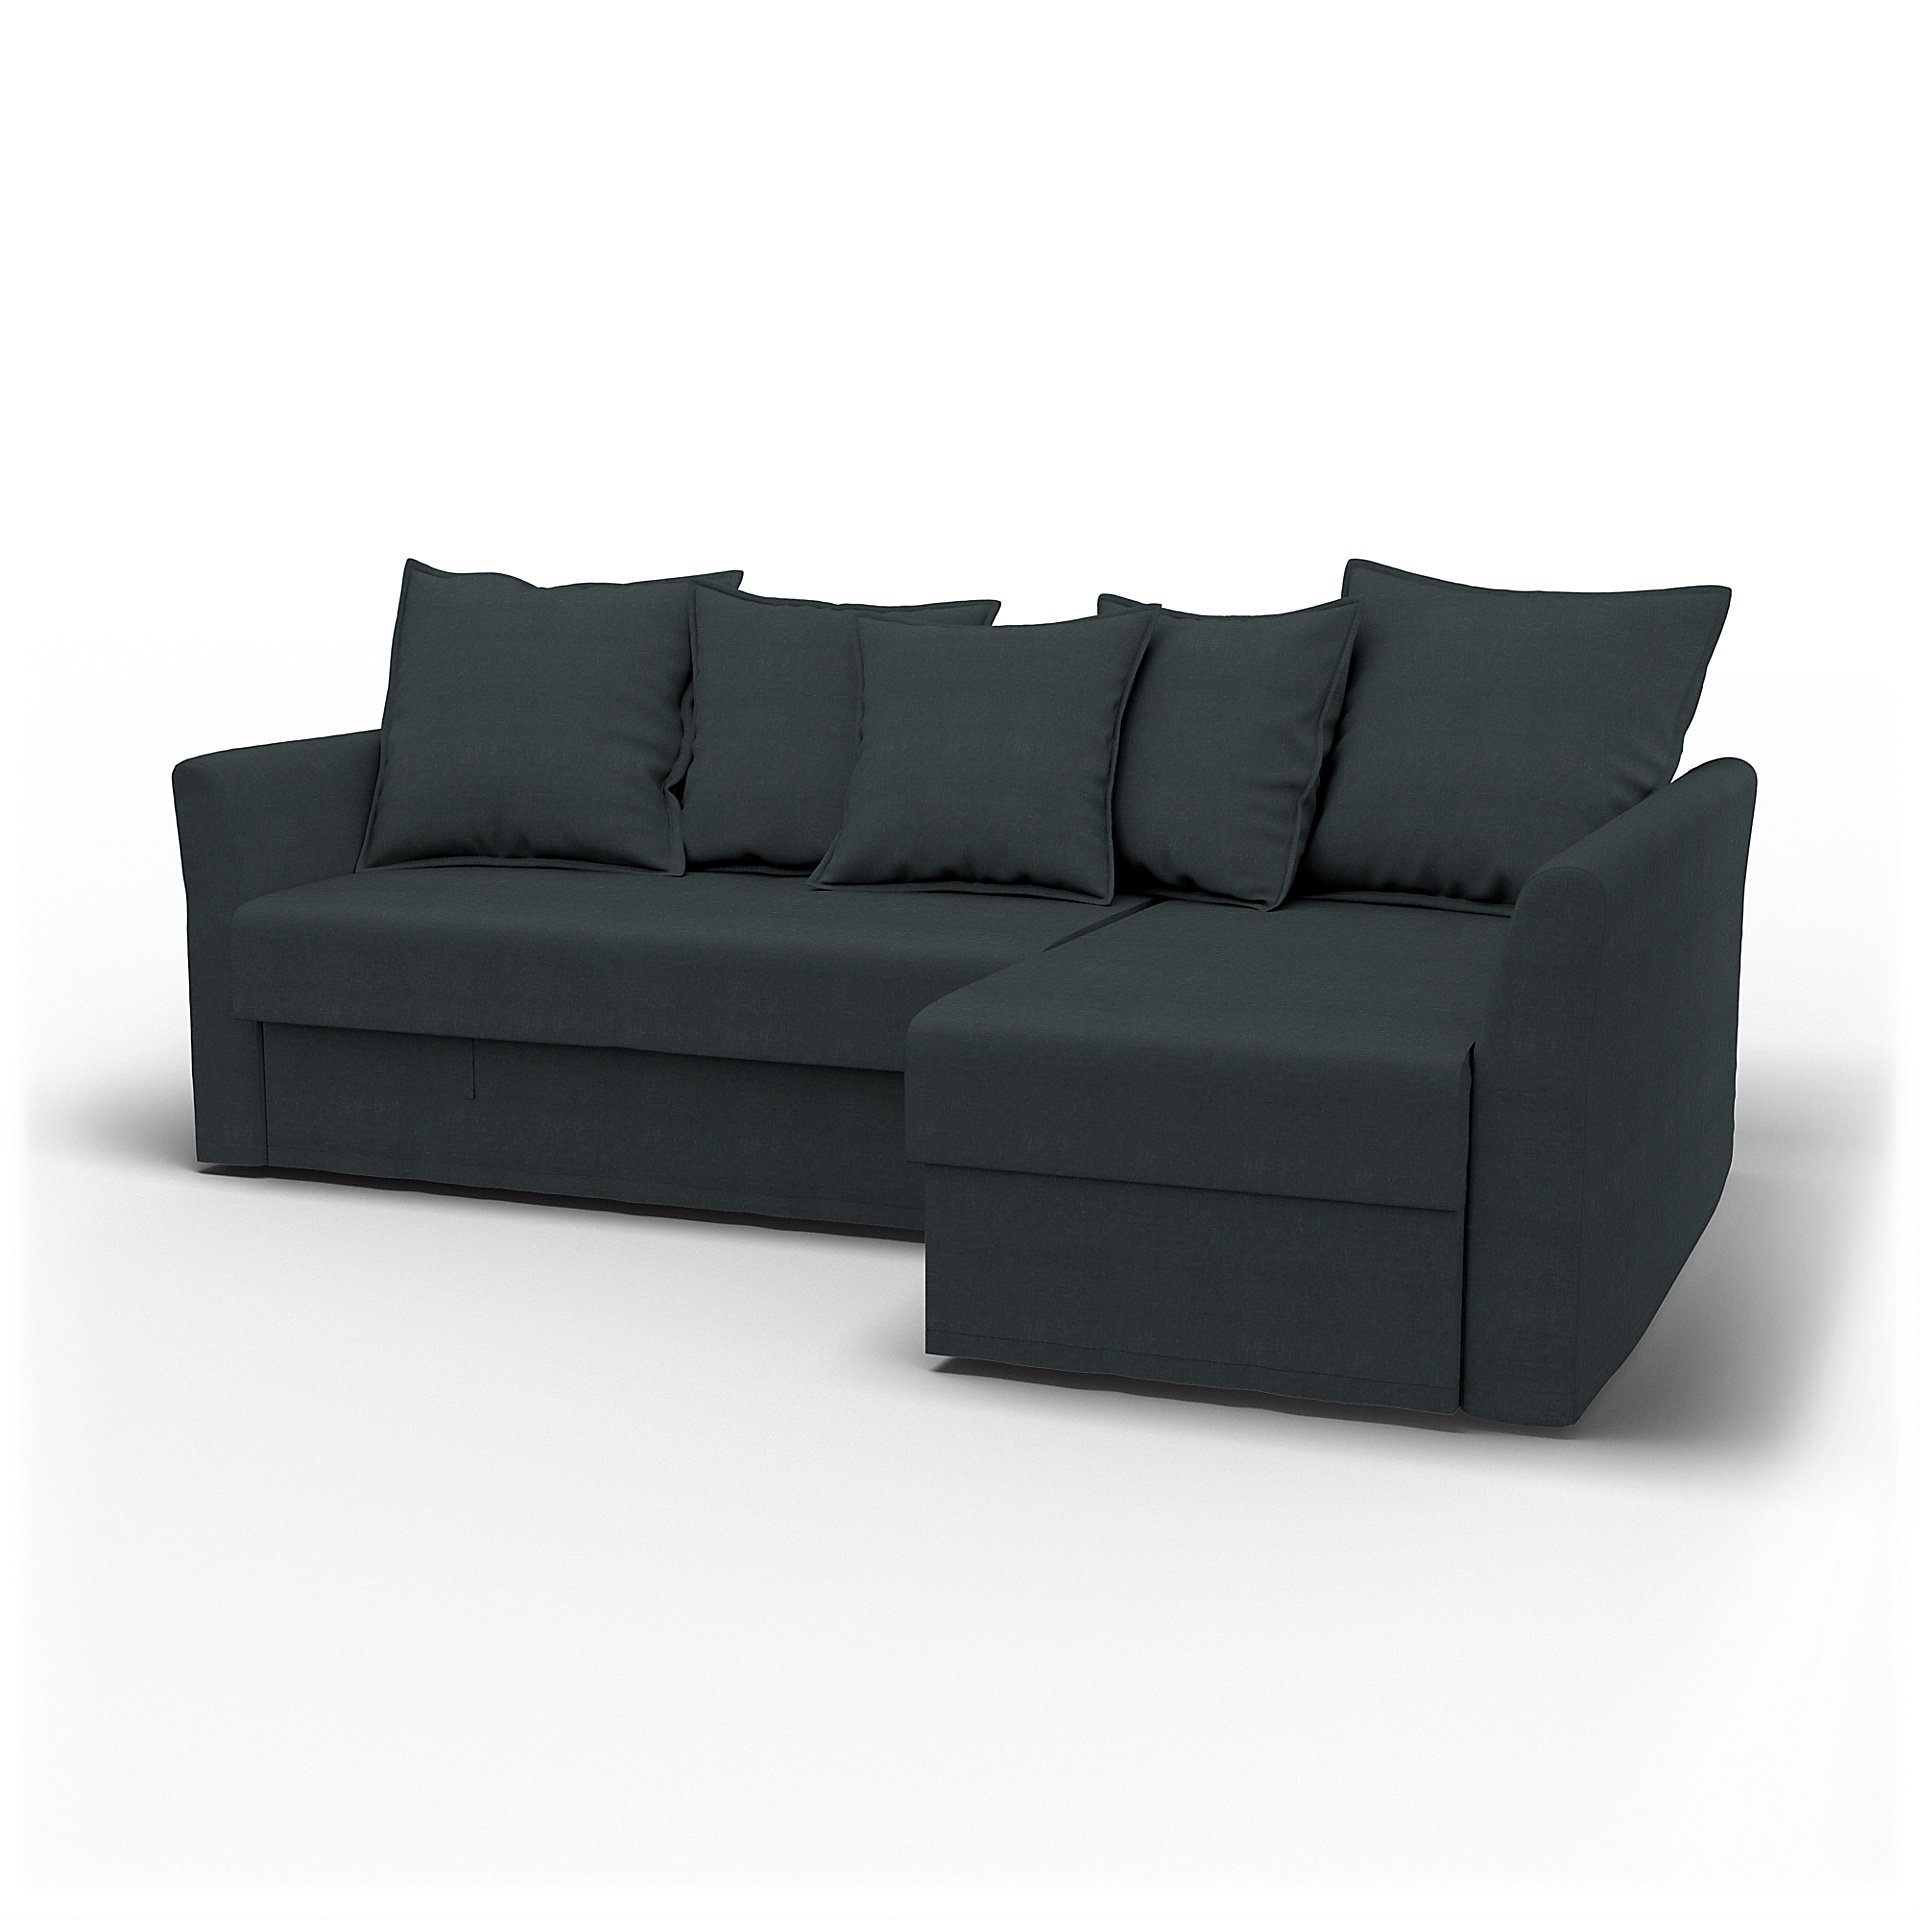 IKEA - Holmsund Sofabed with Chaiselongue, Graphite Grey, Linen - Bemz